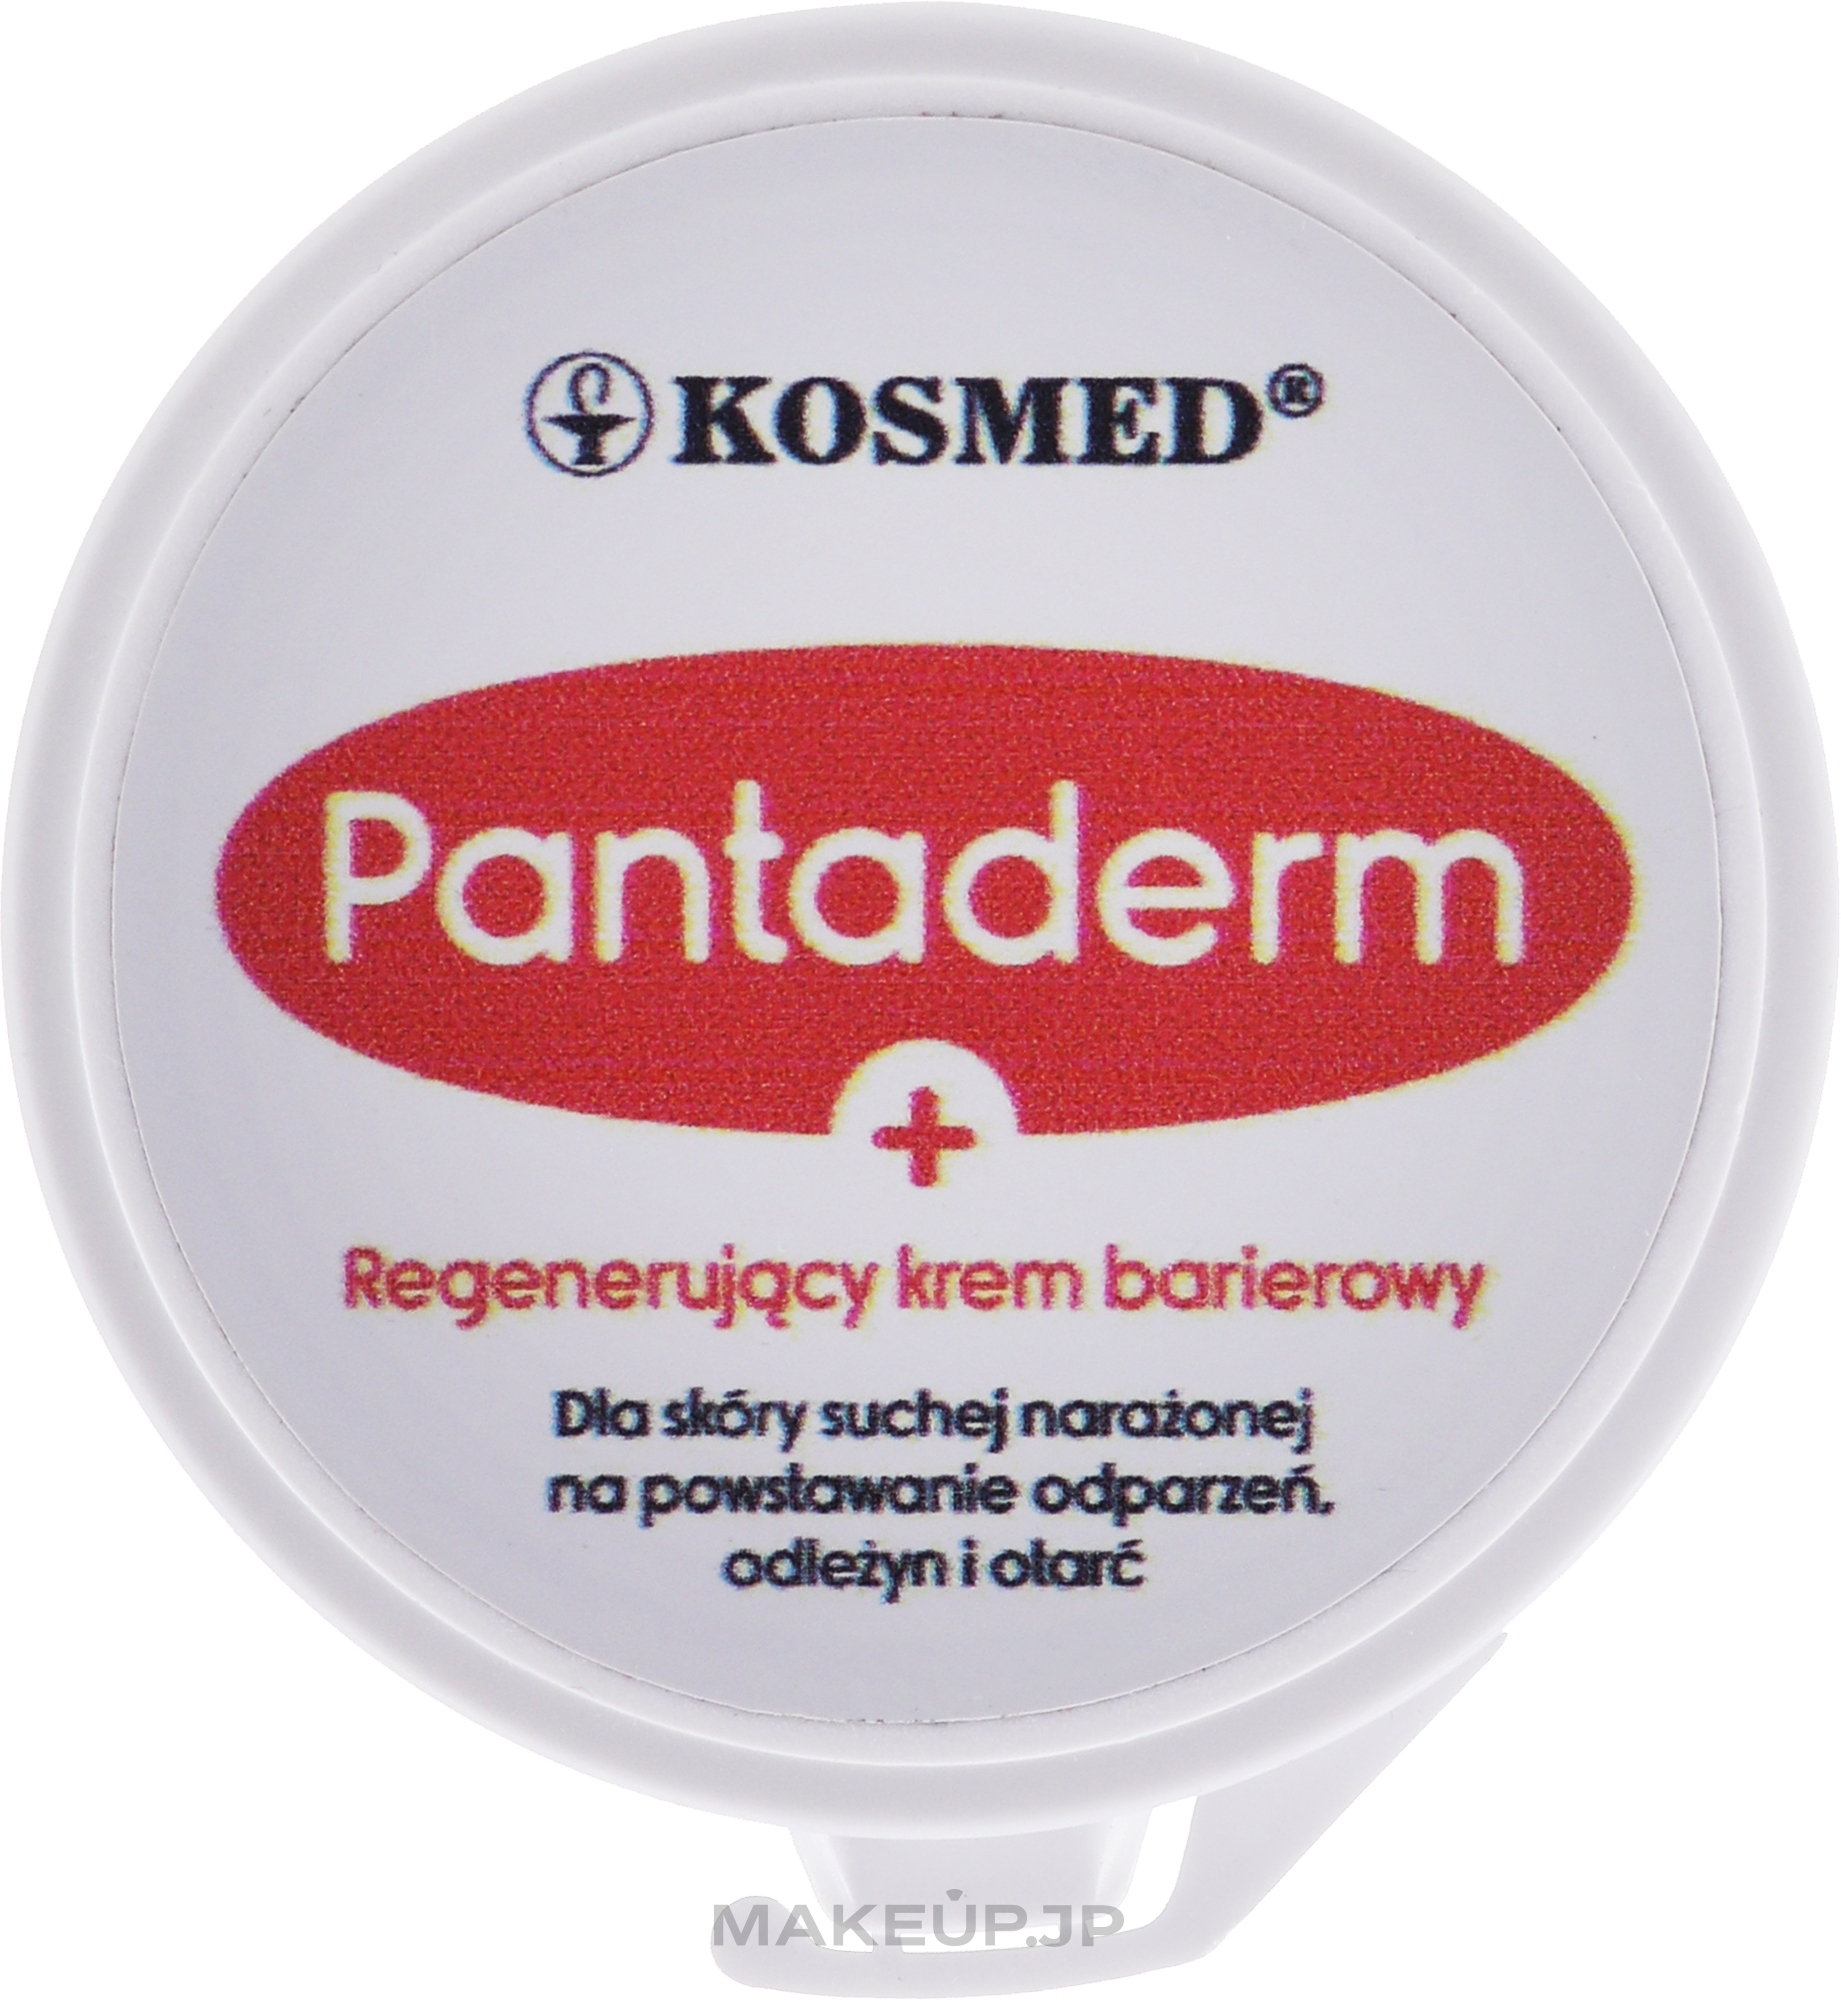 Cream for Bedsores, Abrasions & Frostbite - Kosmed Pantederm Cream — photo 50 ml